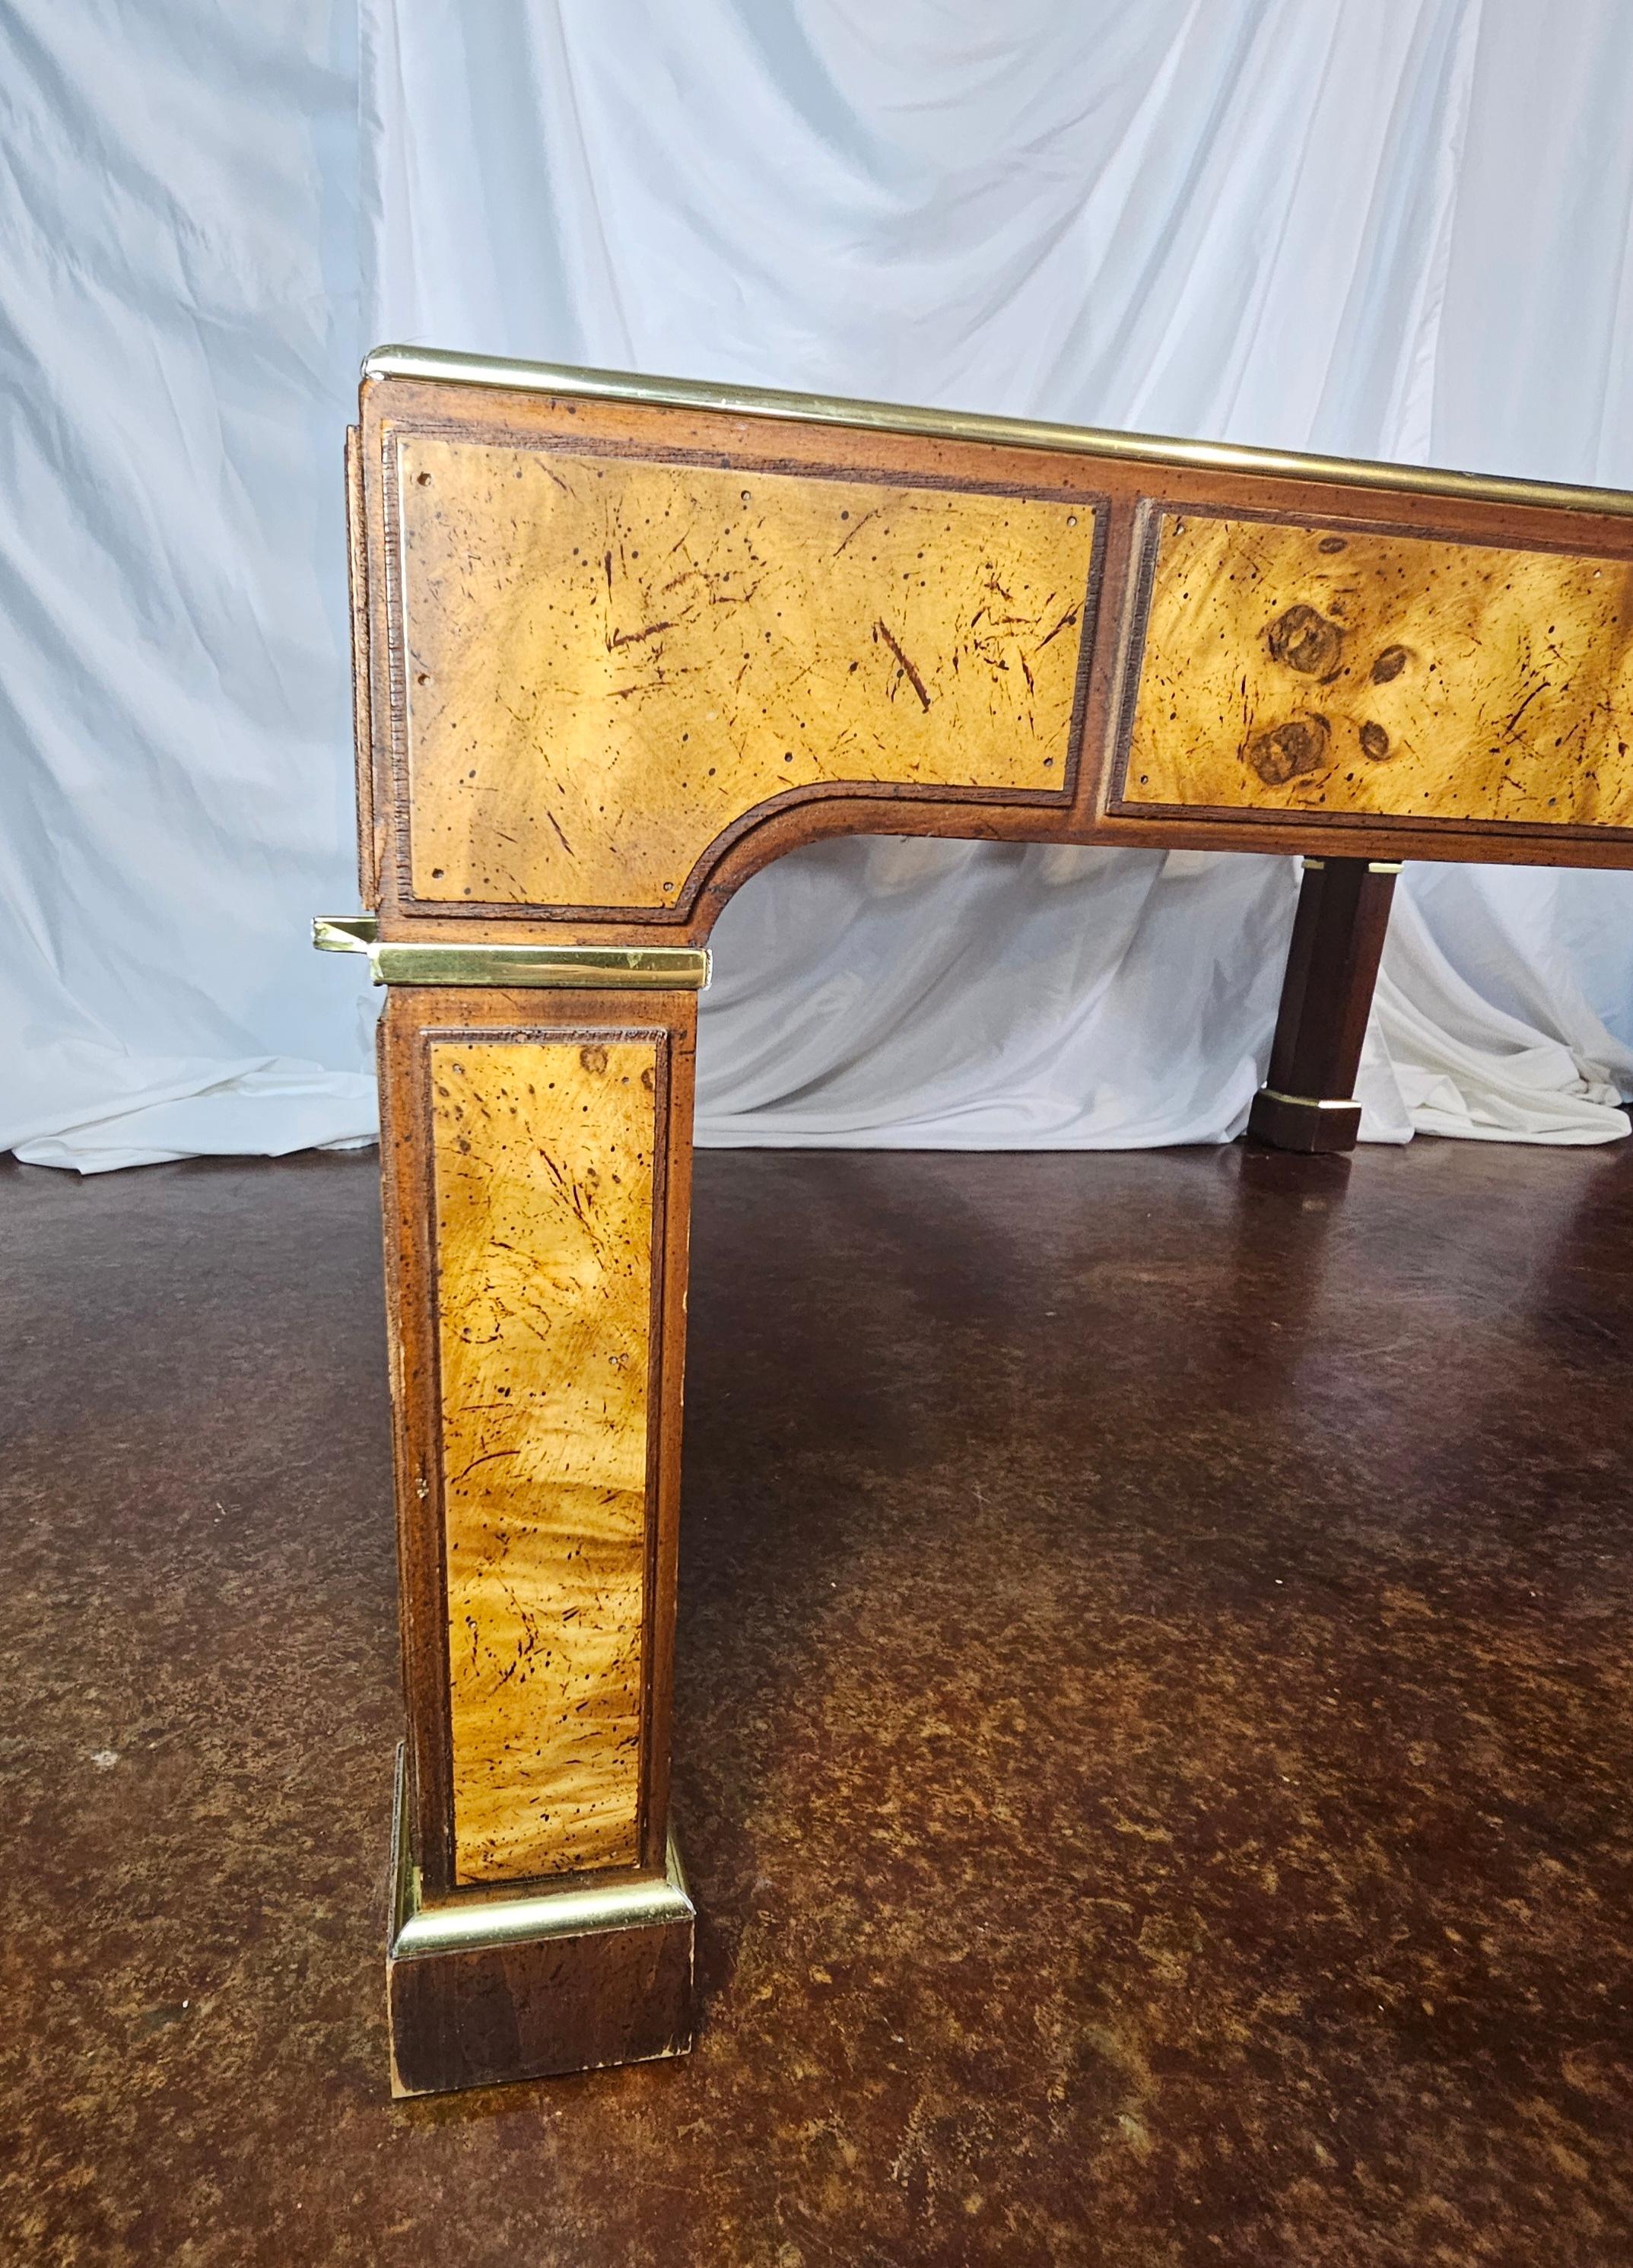 Vintage 1970s burlwood and glass coffee table with brass accents. 
Smoked, beveled glass, lifts out.
Stunning use of burlwood accents. 
In the style of Milo Baughman or Mastercraft. 
Hollywood Regency. 
Chinoiserie. 
